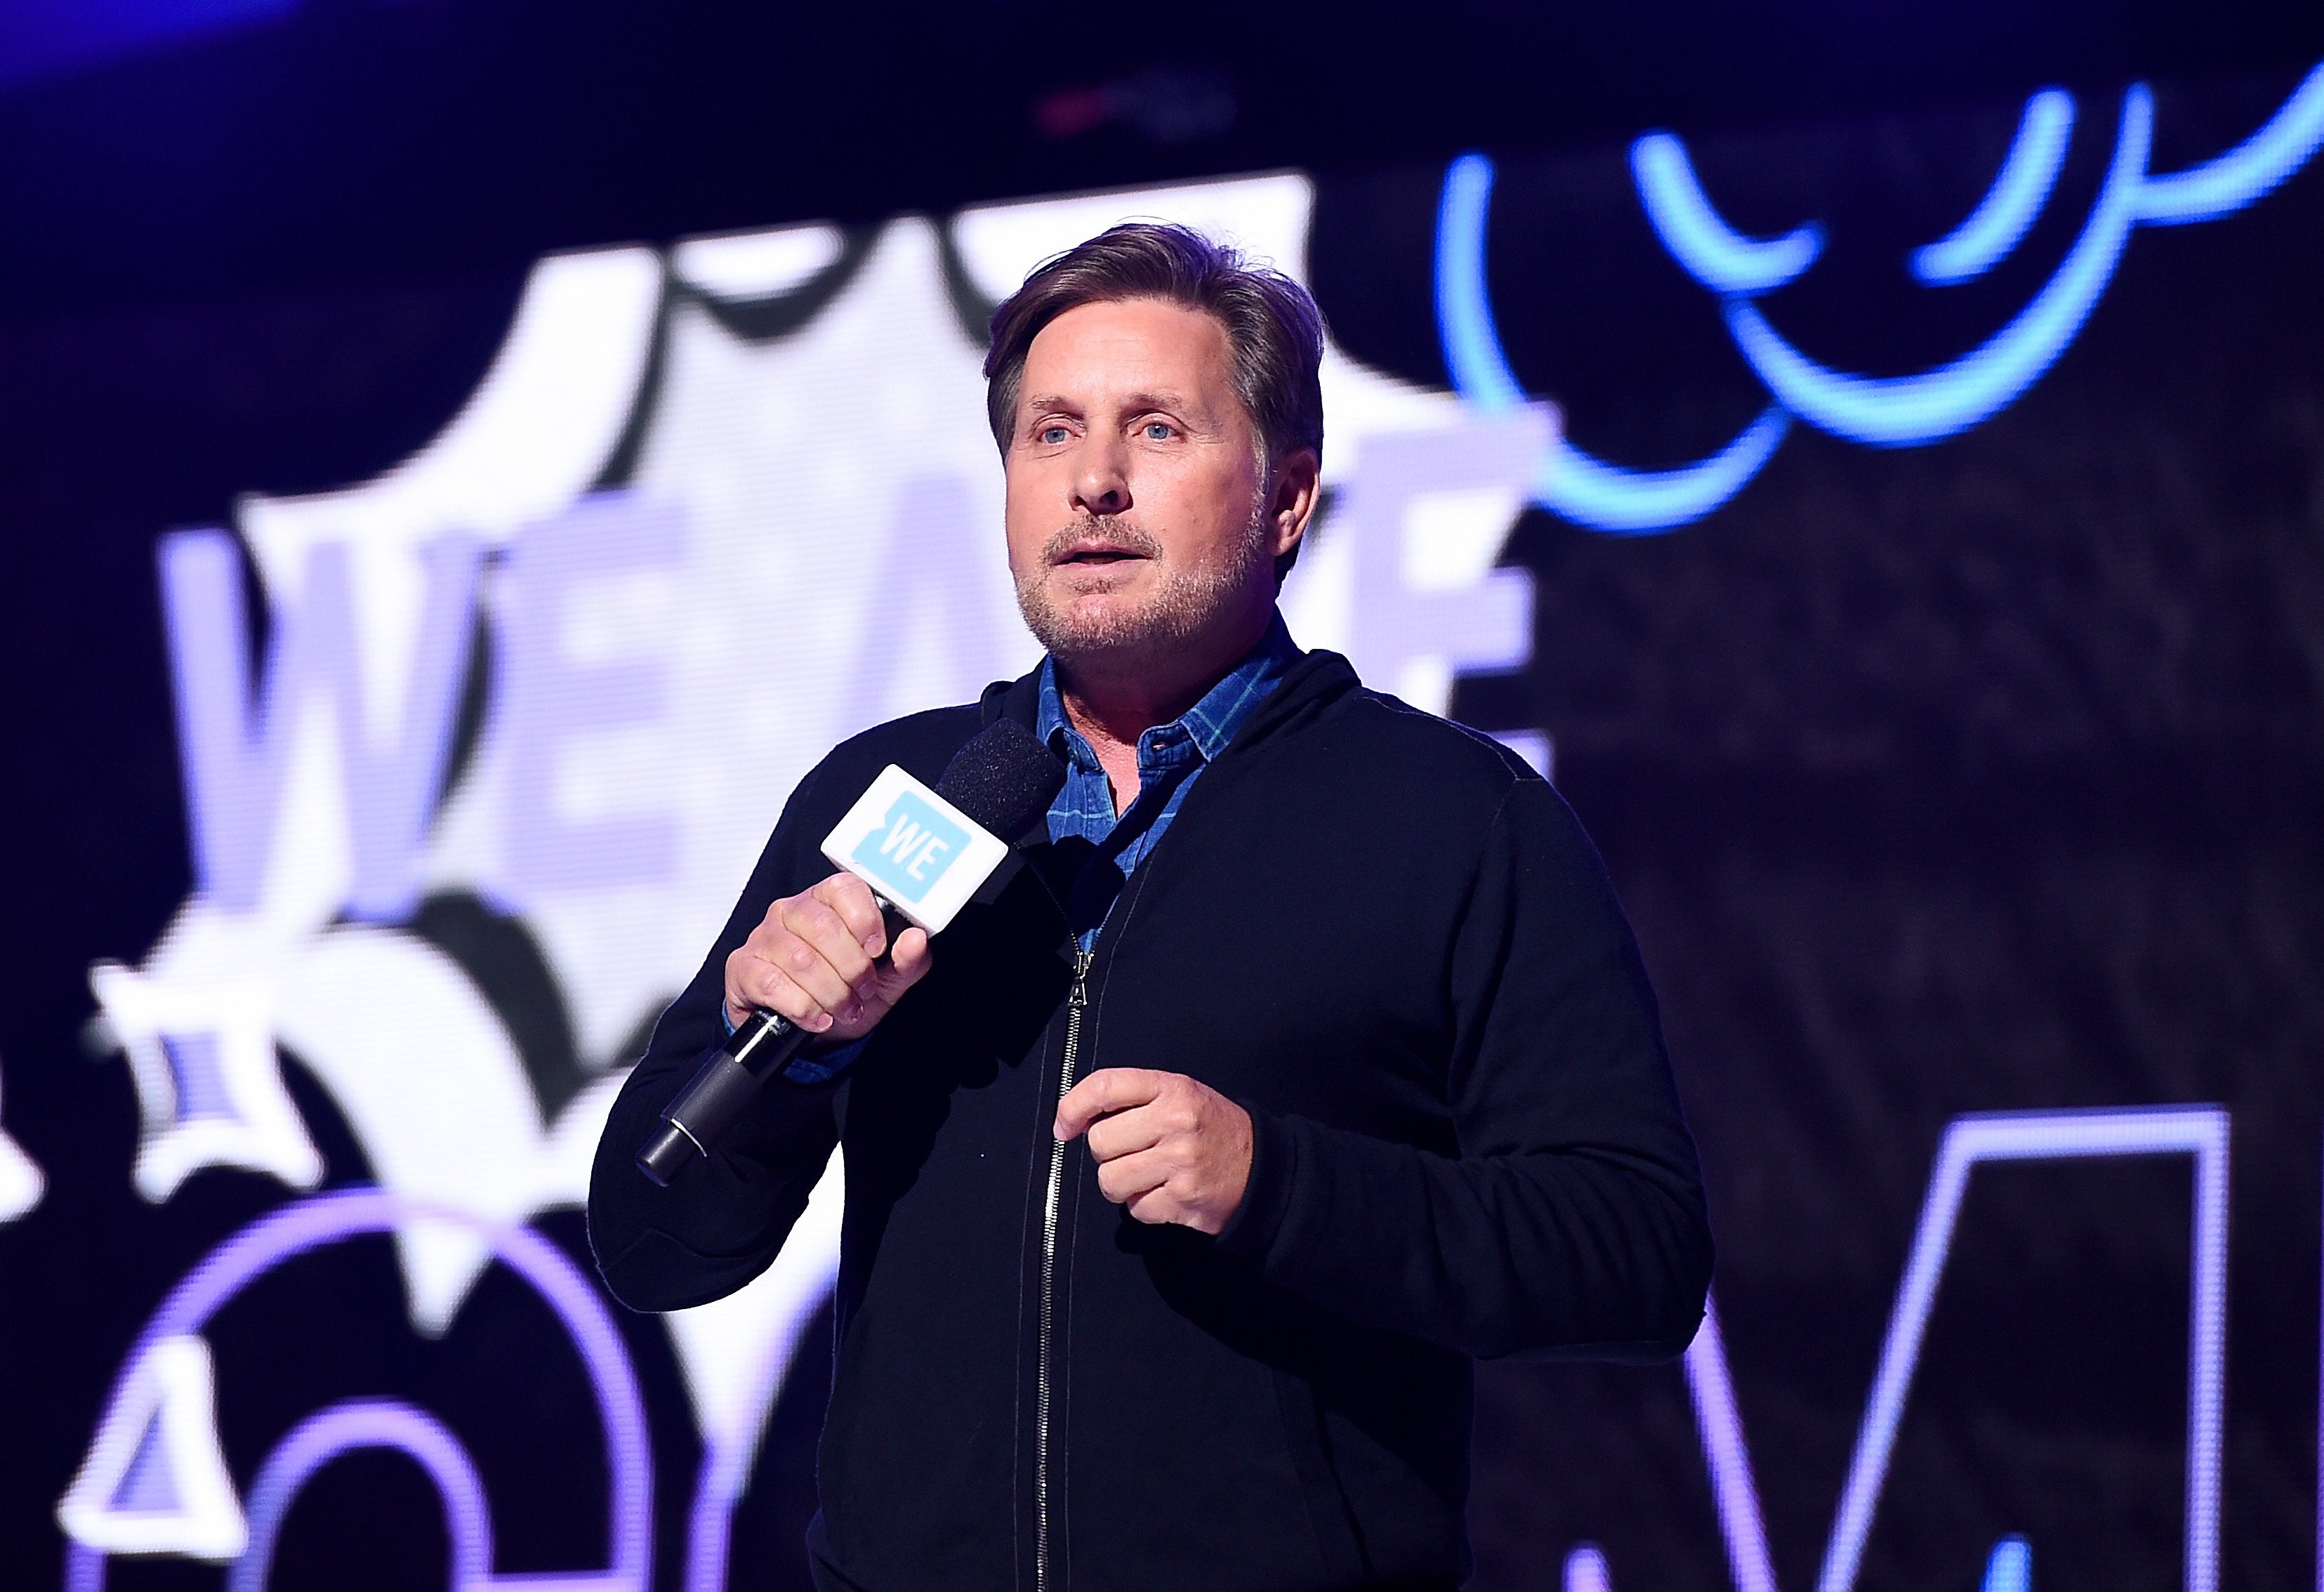 Emilio Estevez speaking onstage during WE Day UN 2019 at Barclays Center on September 25, 2019 in New York City. / Source: Getty Images